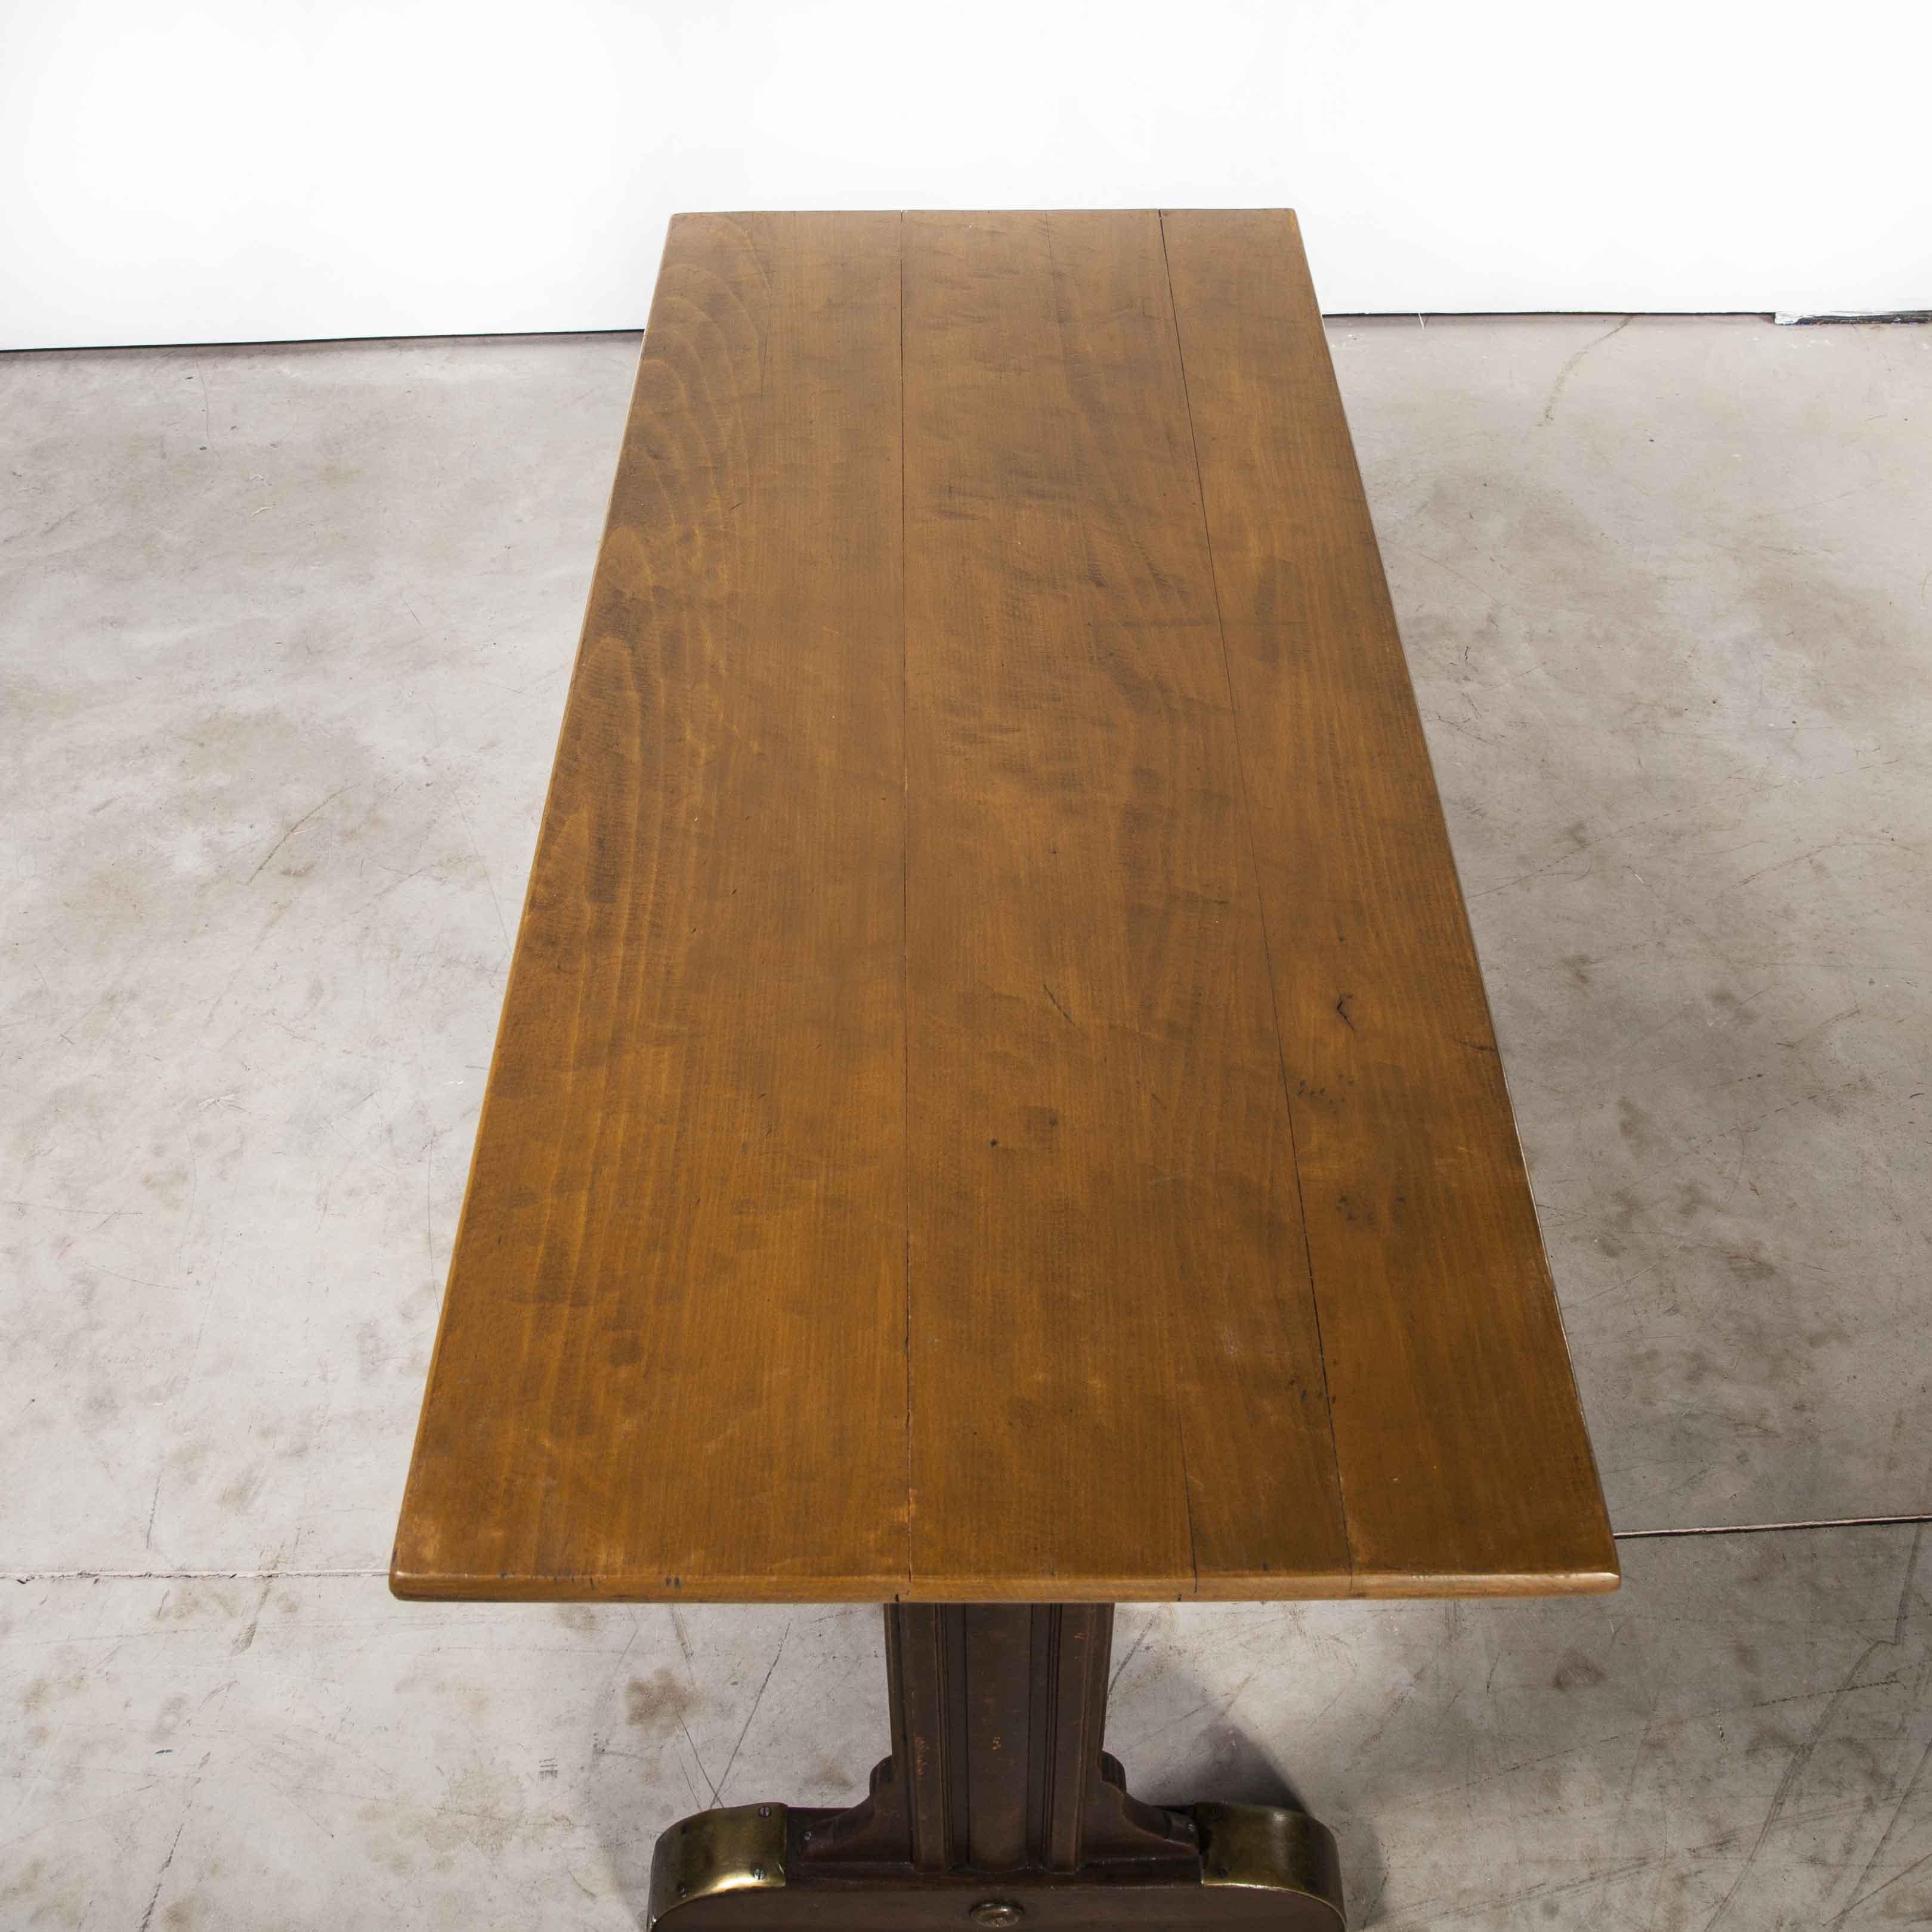 1930’s original french cafe table – rectangular dining table (model 1114.2)

1930’s original french cafe table – rectangular dining table. Instantly familiar, this is a classic French cafe table that has survived since the 30’s. Made in solid oak